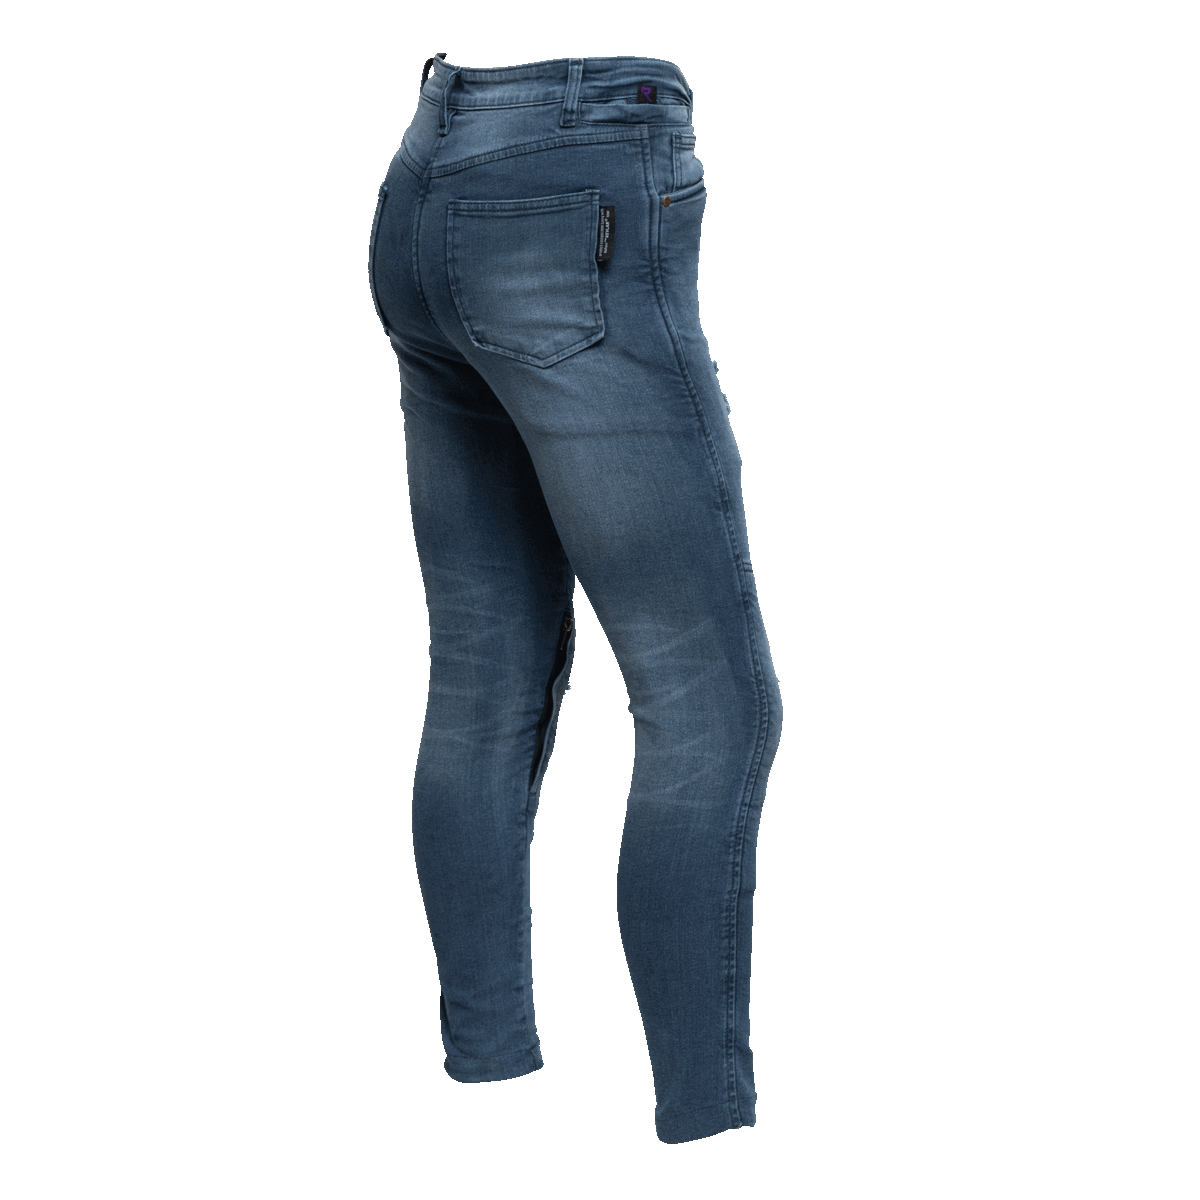 RAVEN Moto - Motorcycle Jeans | Women's High-Waisted REVOLT Ripped ...